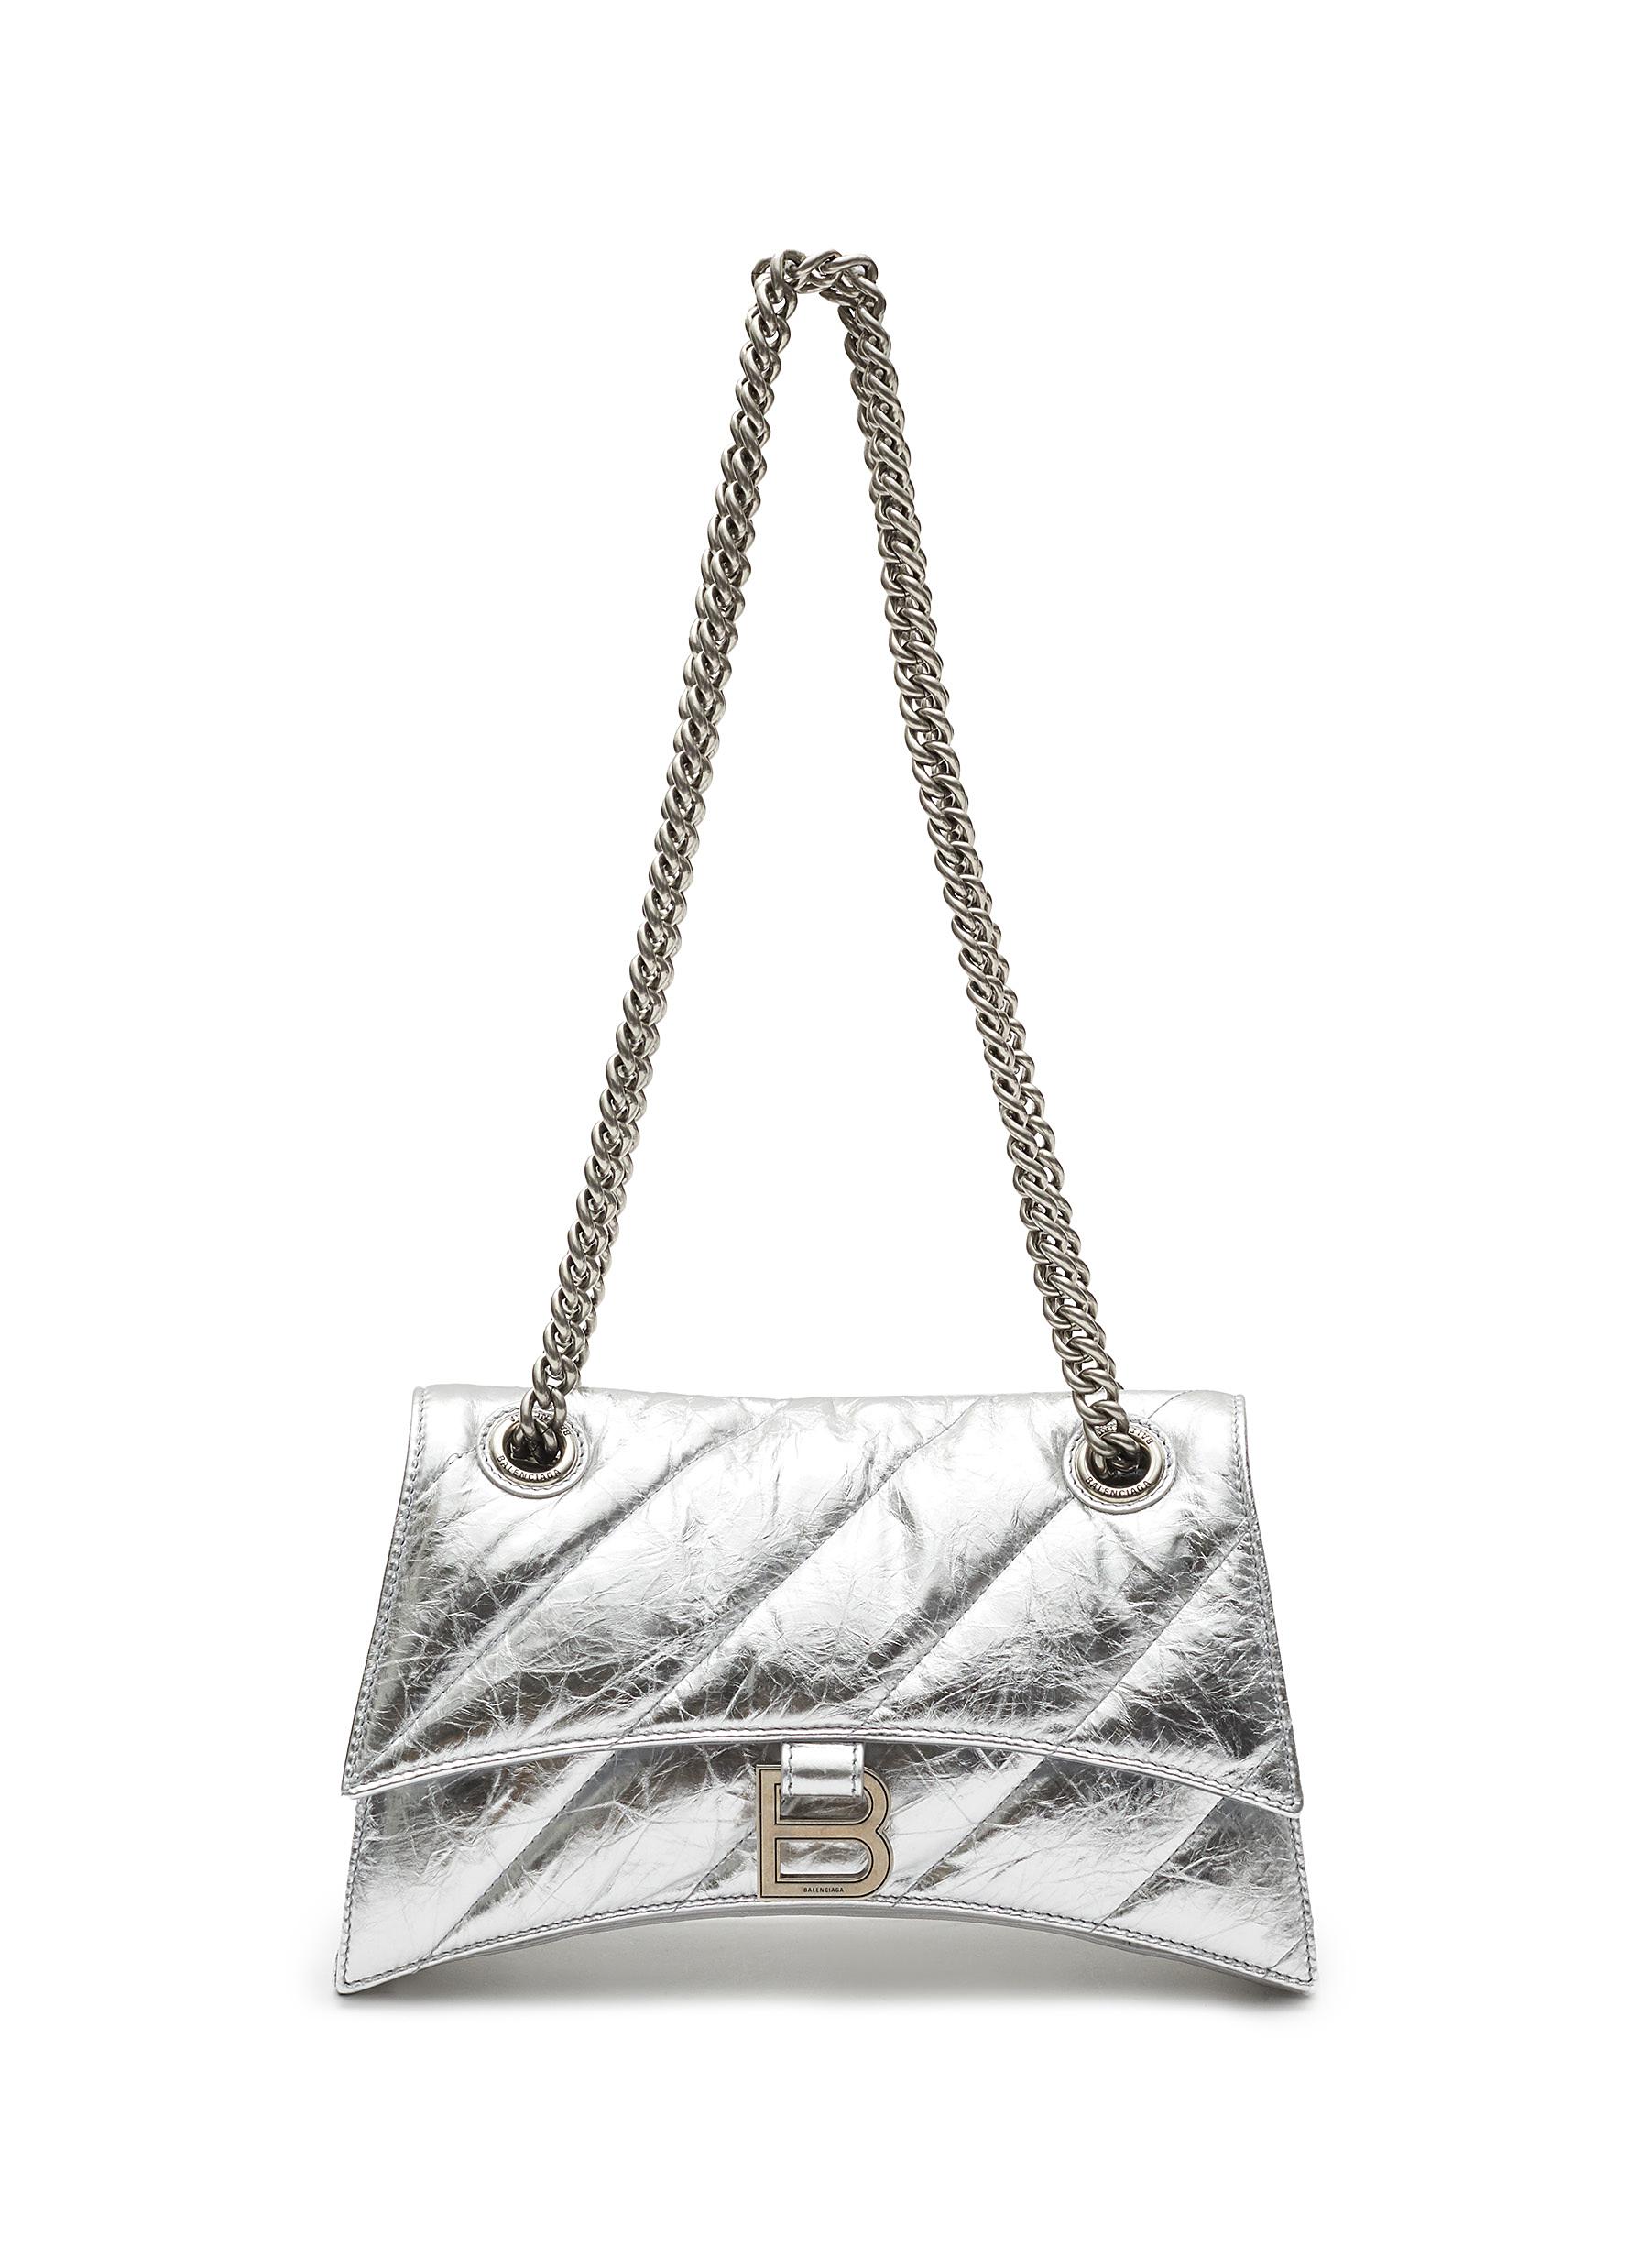 â€˜CRUSH’ QUILTED CHAIN BAG